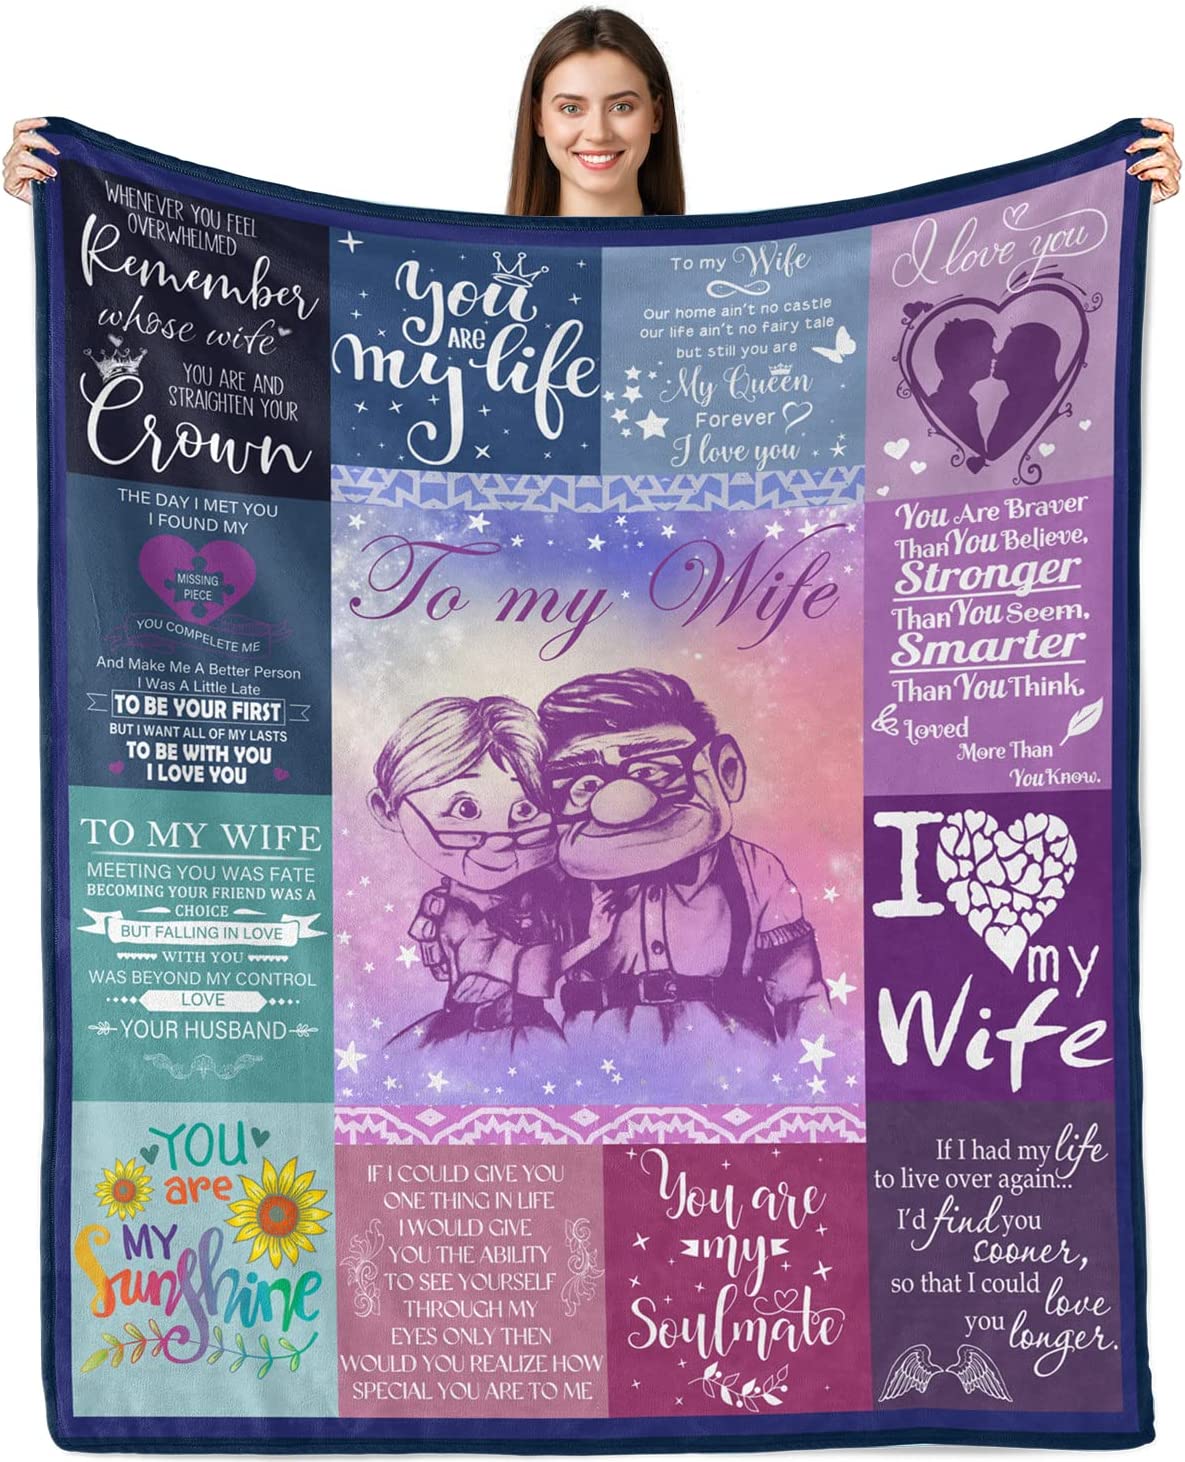 Wife Gift Blanket From Husband, Old Couple Blanket to Wife, Anniversary Birthday Christmas Blanket Gift Ideas for Her